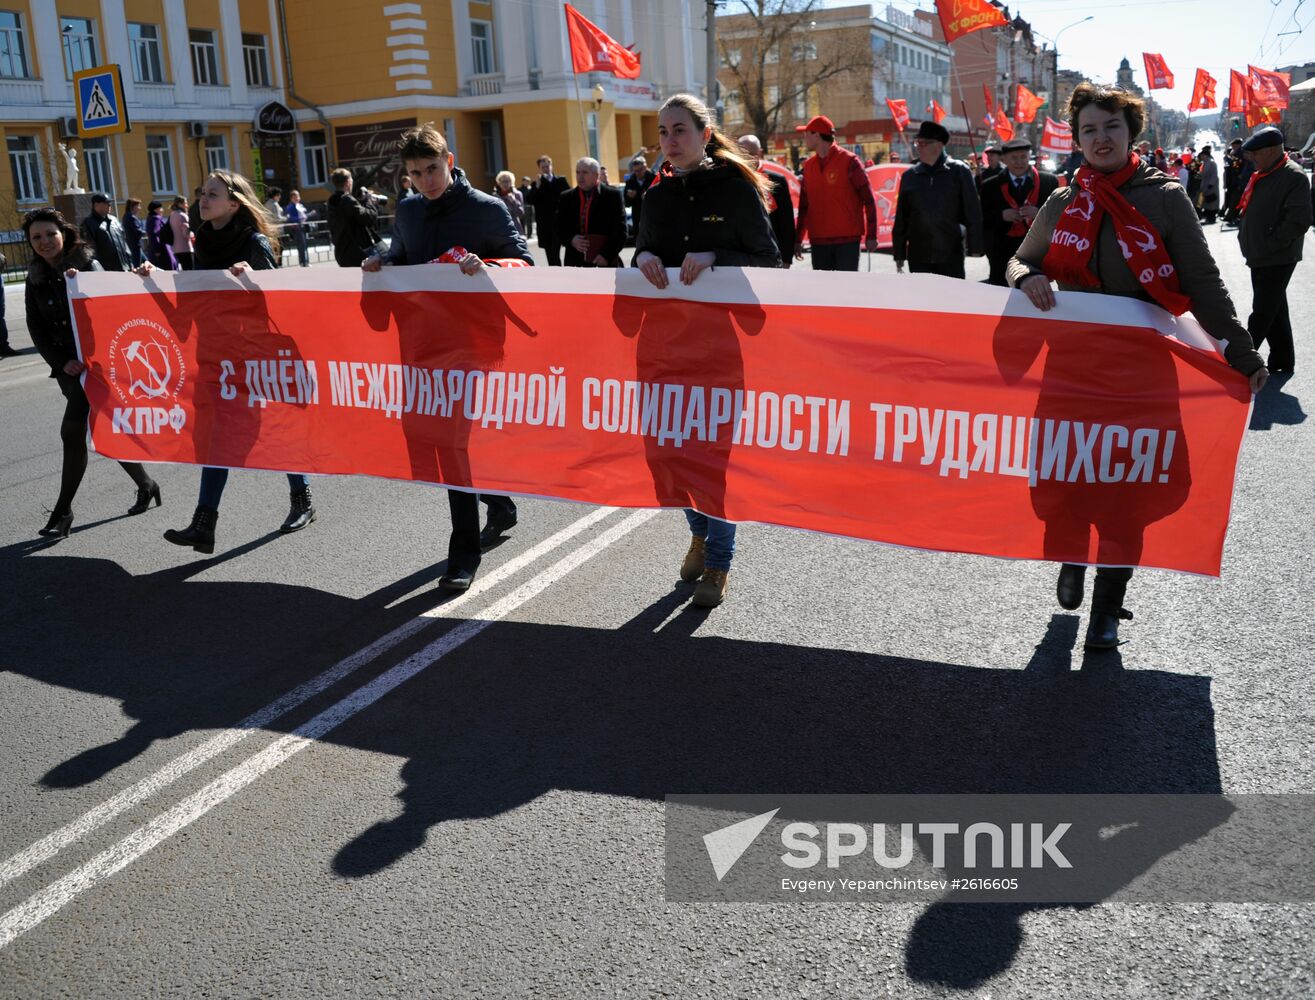 May Day marches across Russia